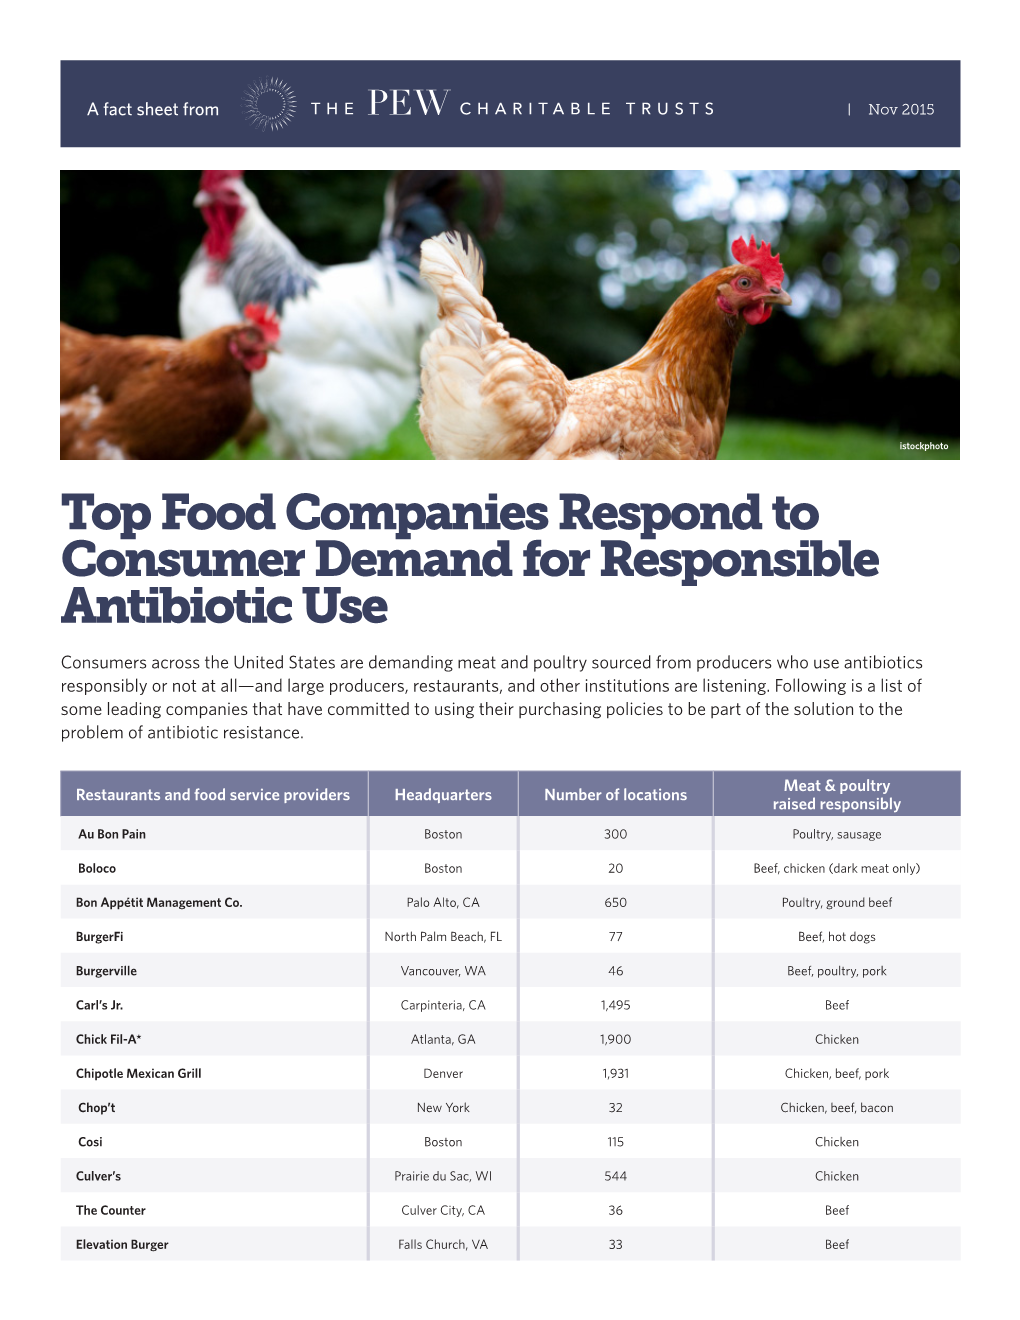 Top Food Companies Respond to Consumer Demand for Responsible Antibiotic Use